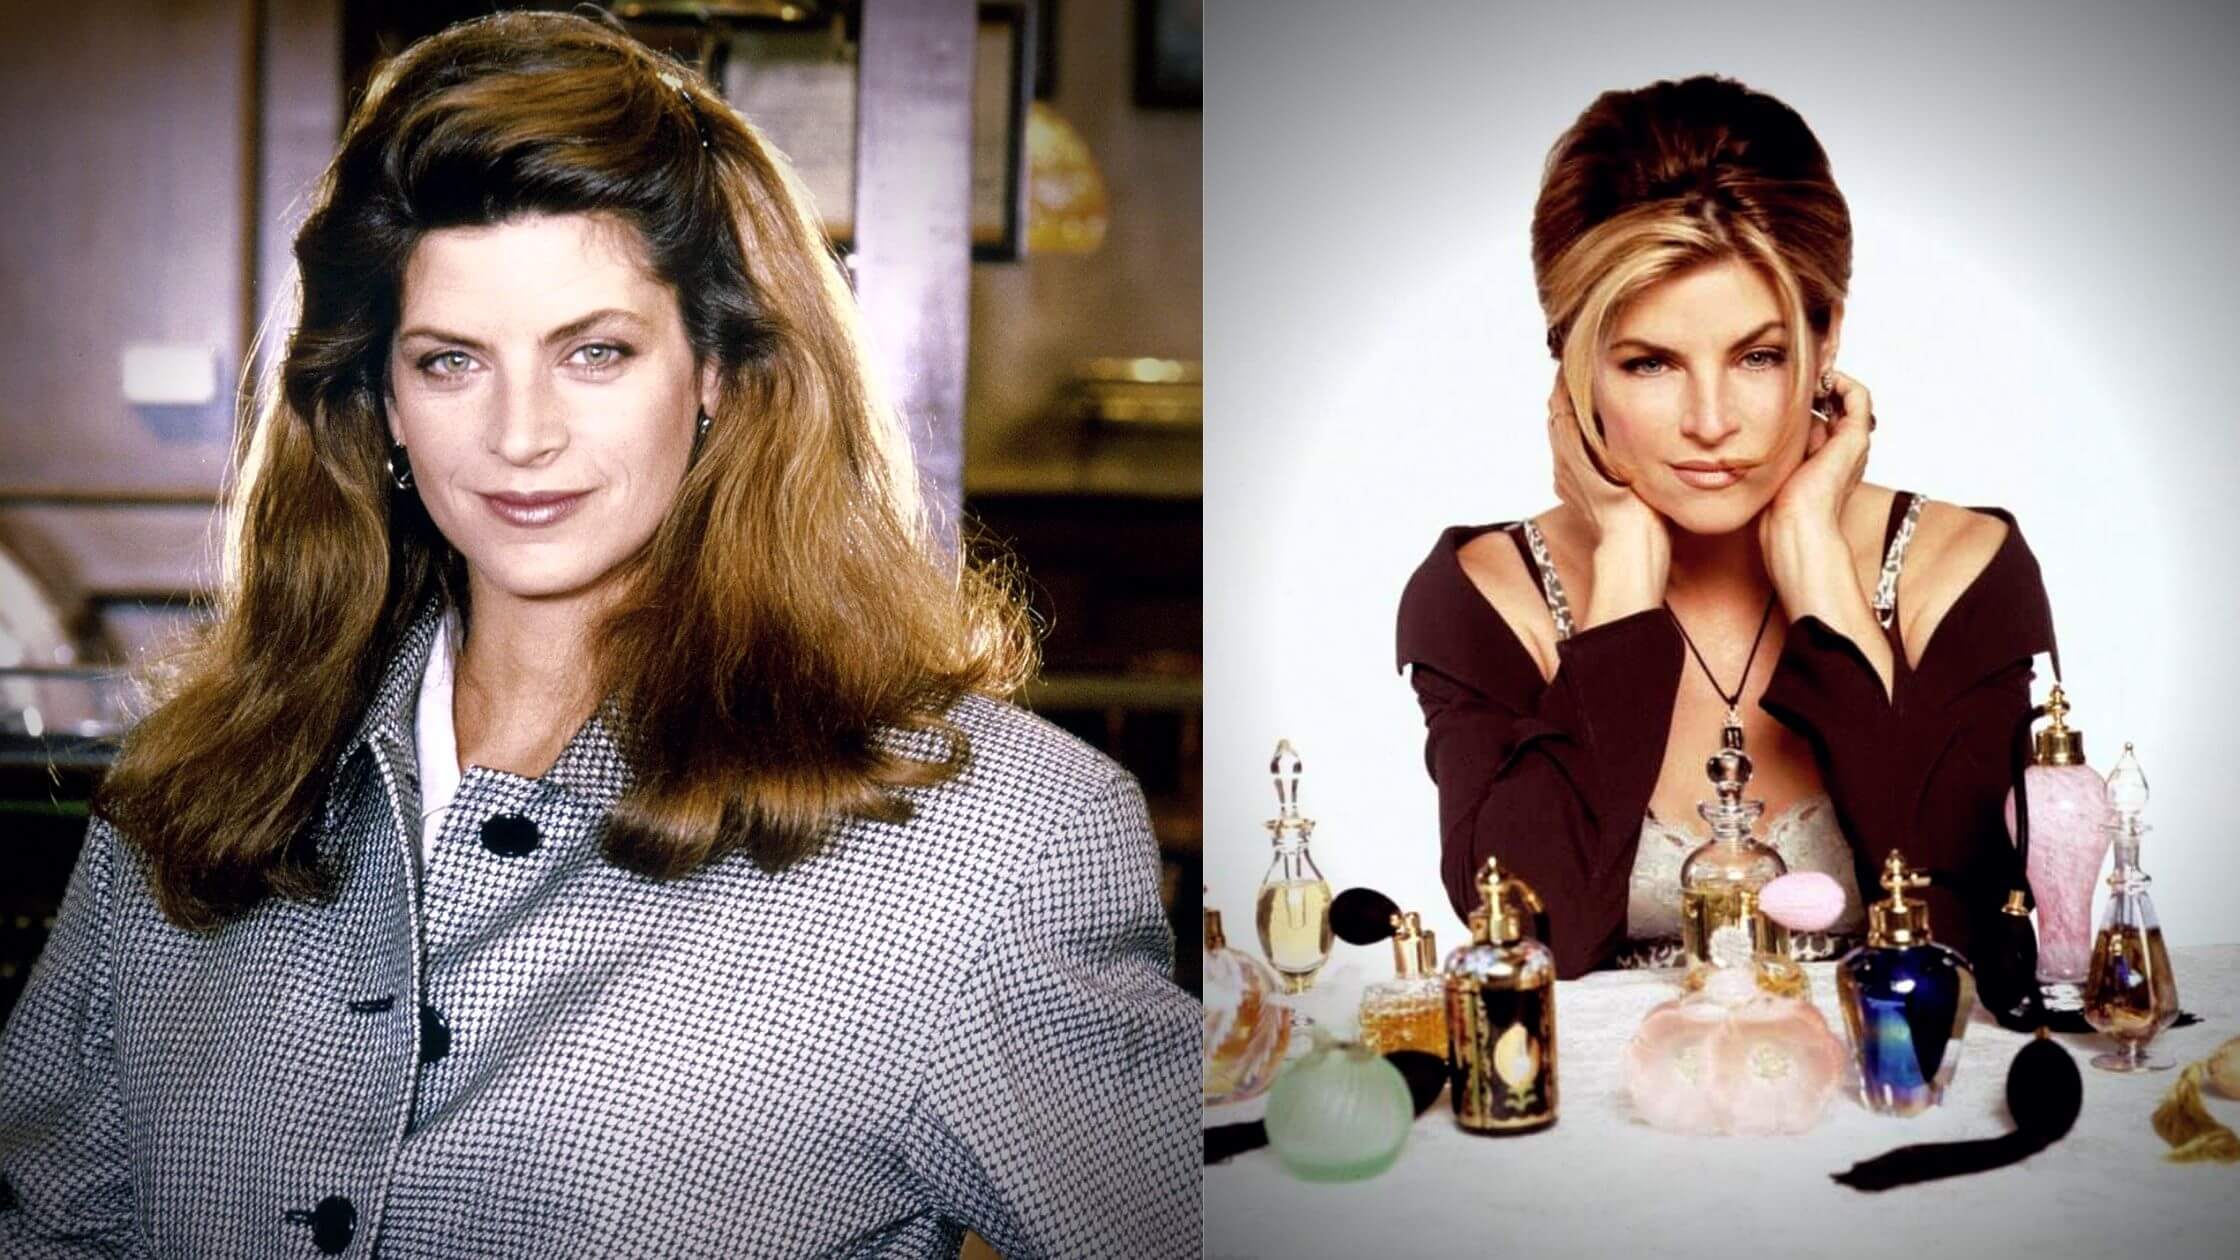 Fans And Co-Stars Are Shocked By Kirstie Alley's Sudden Passing At The Age Of 71